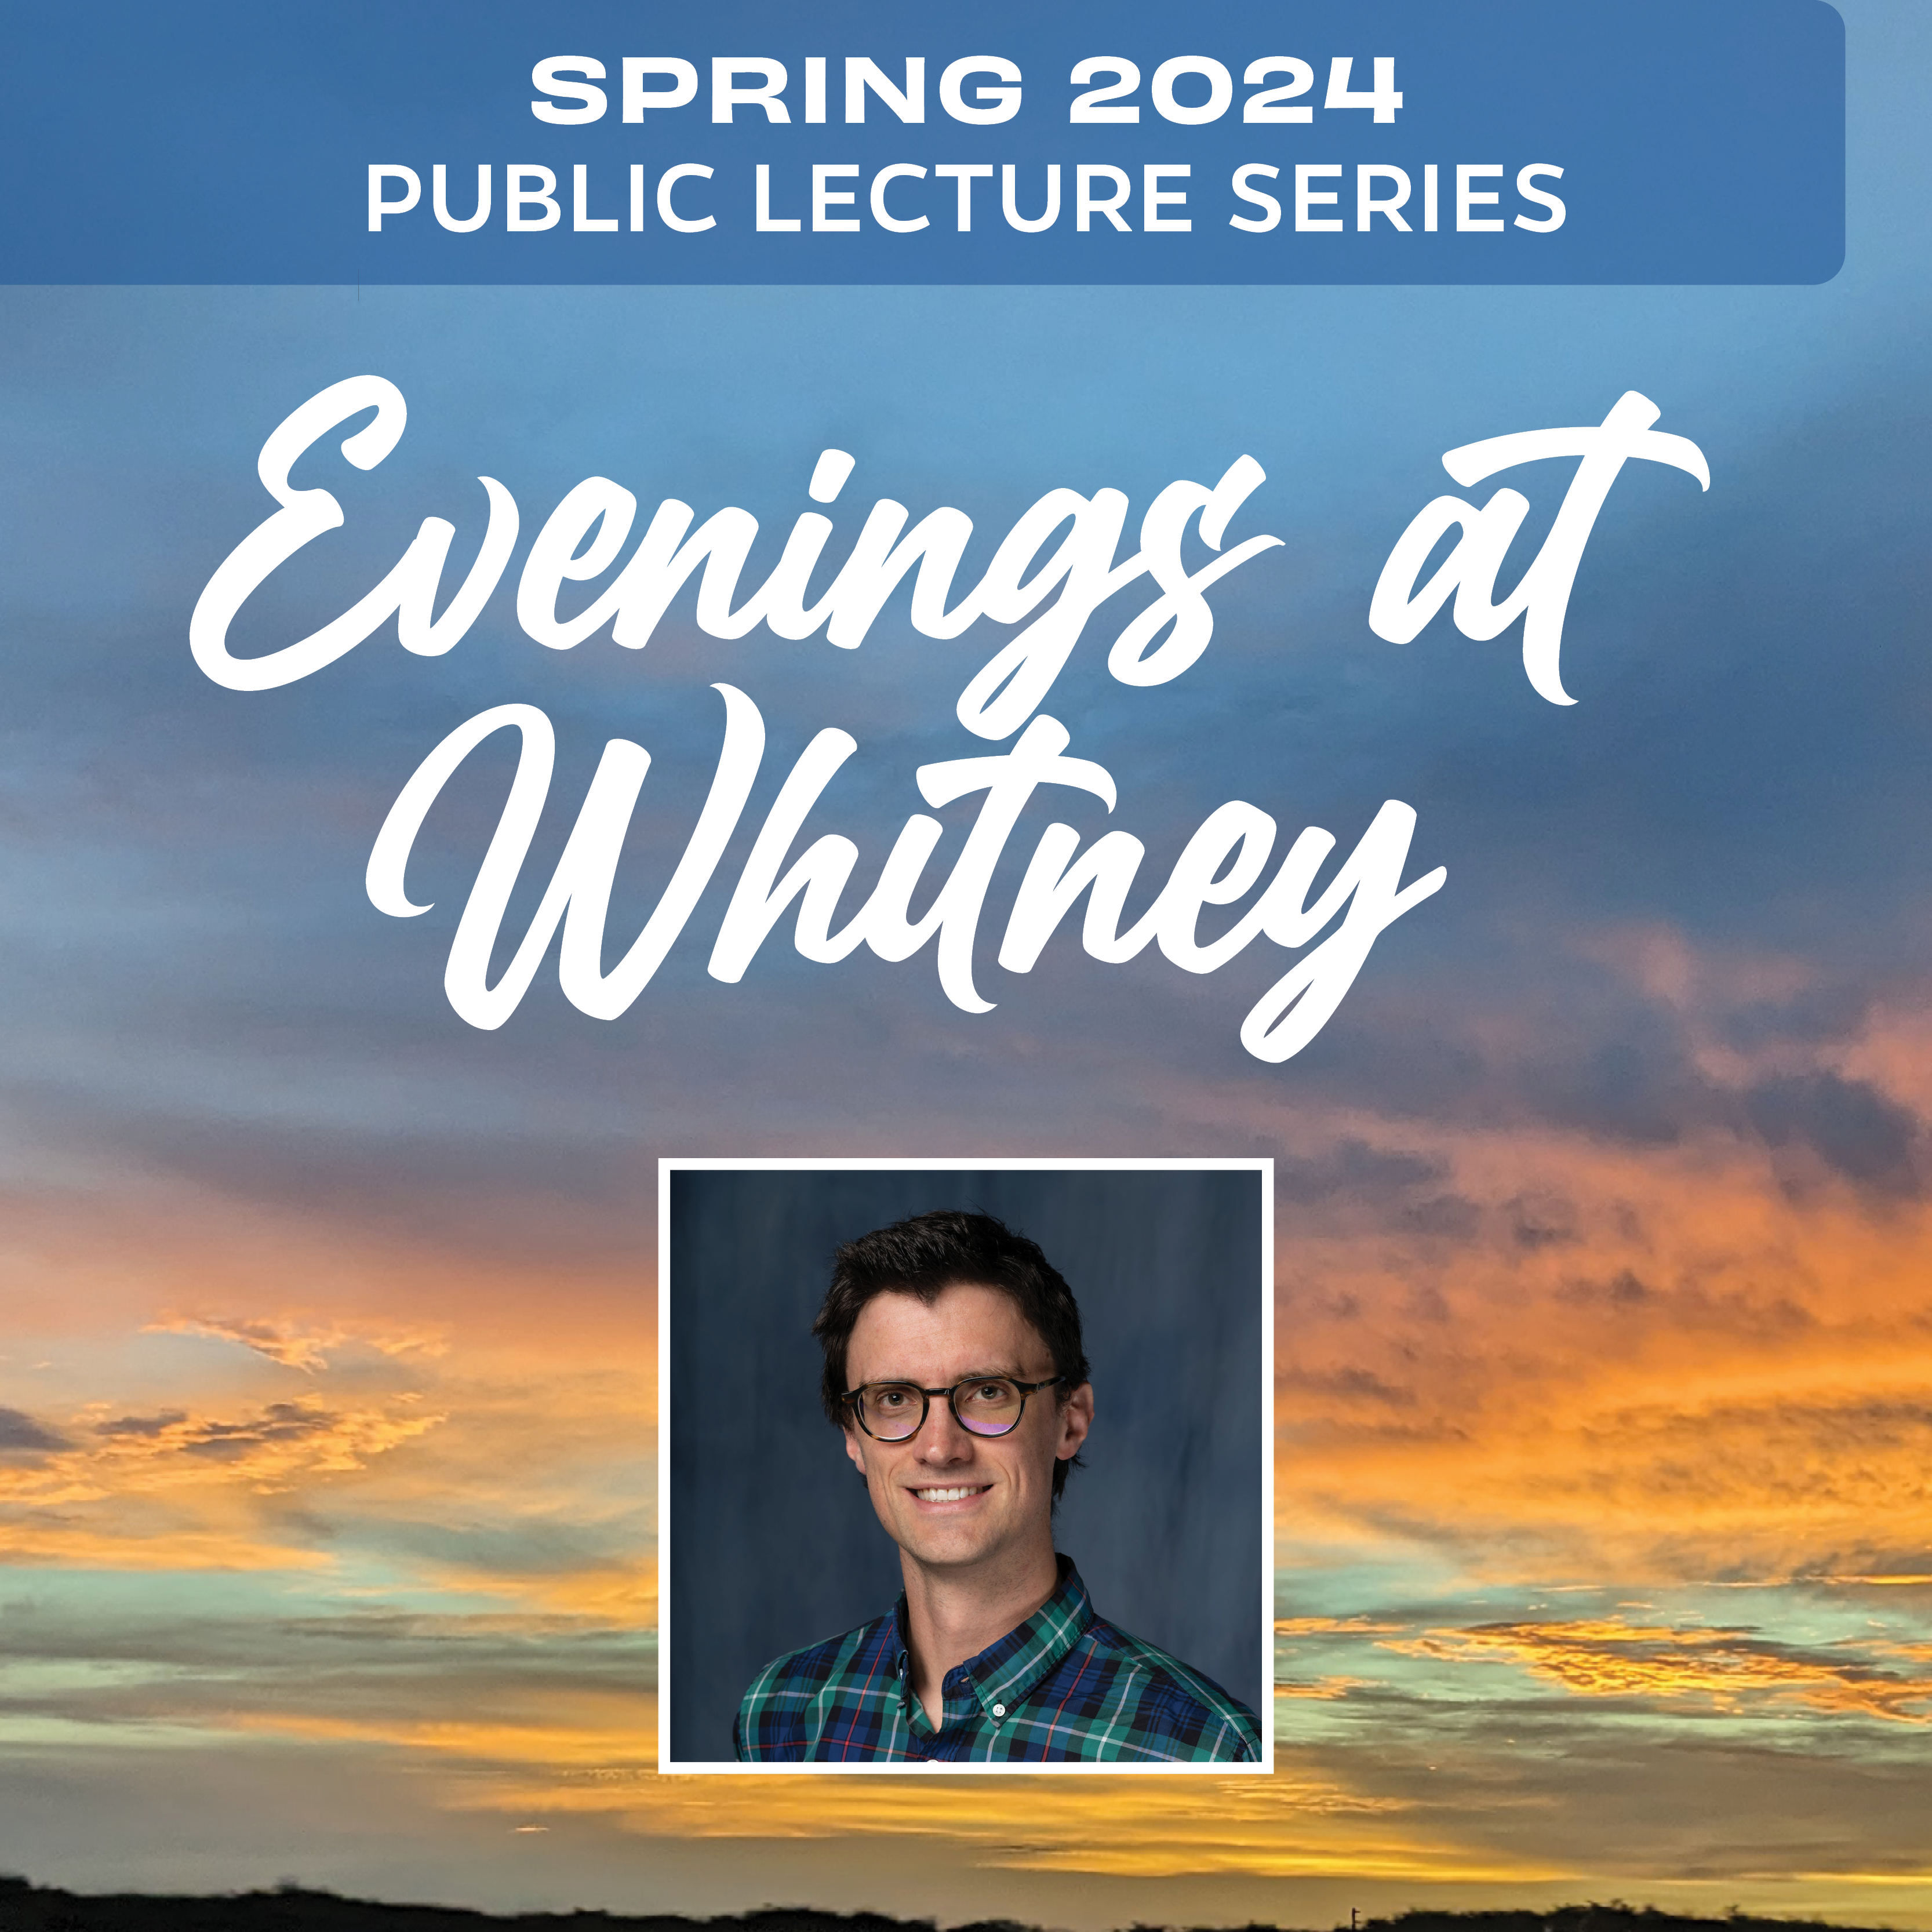 Evenings at Whitney May 9